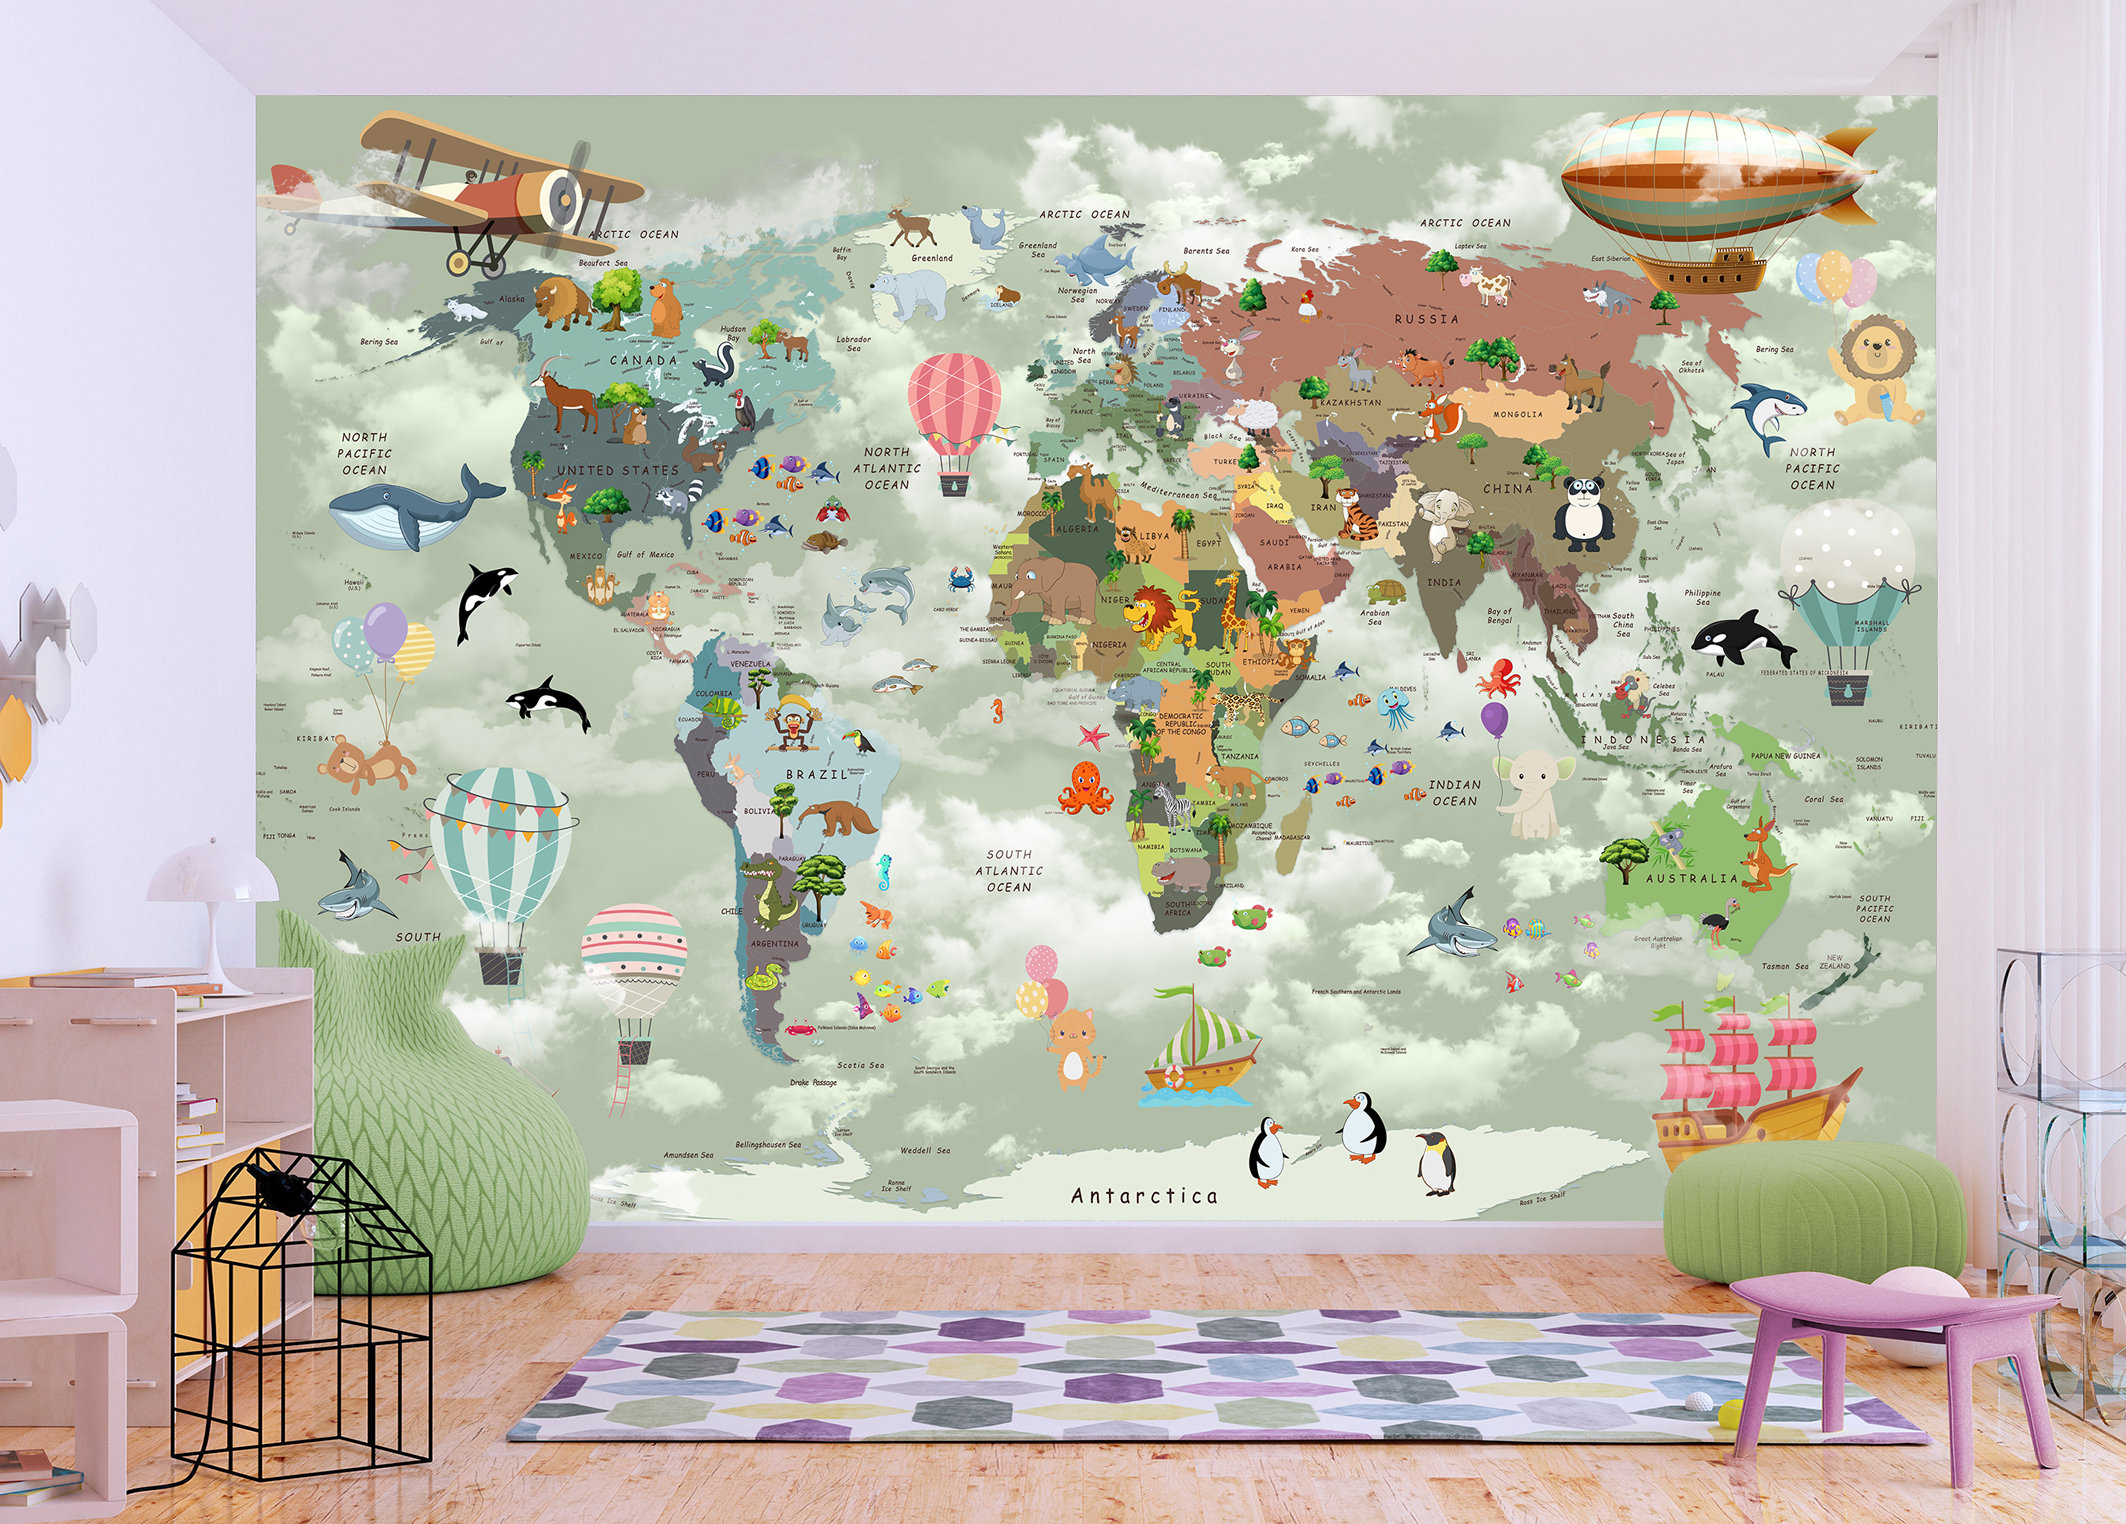 Wallpaper for a Children's Room: Types and Features to Look Out For - Decor  Around The World